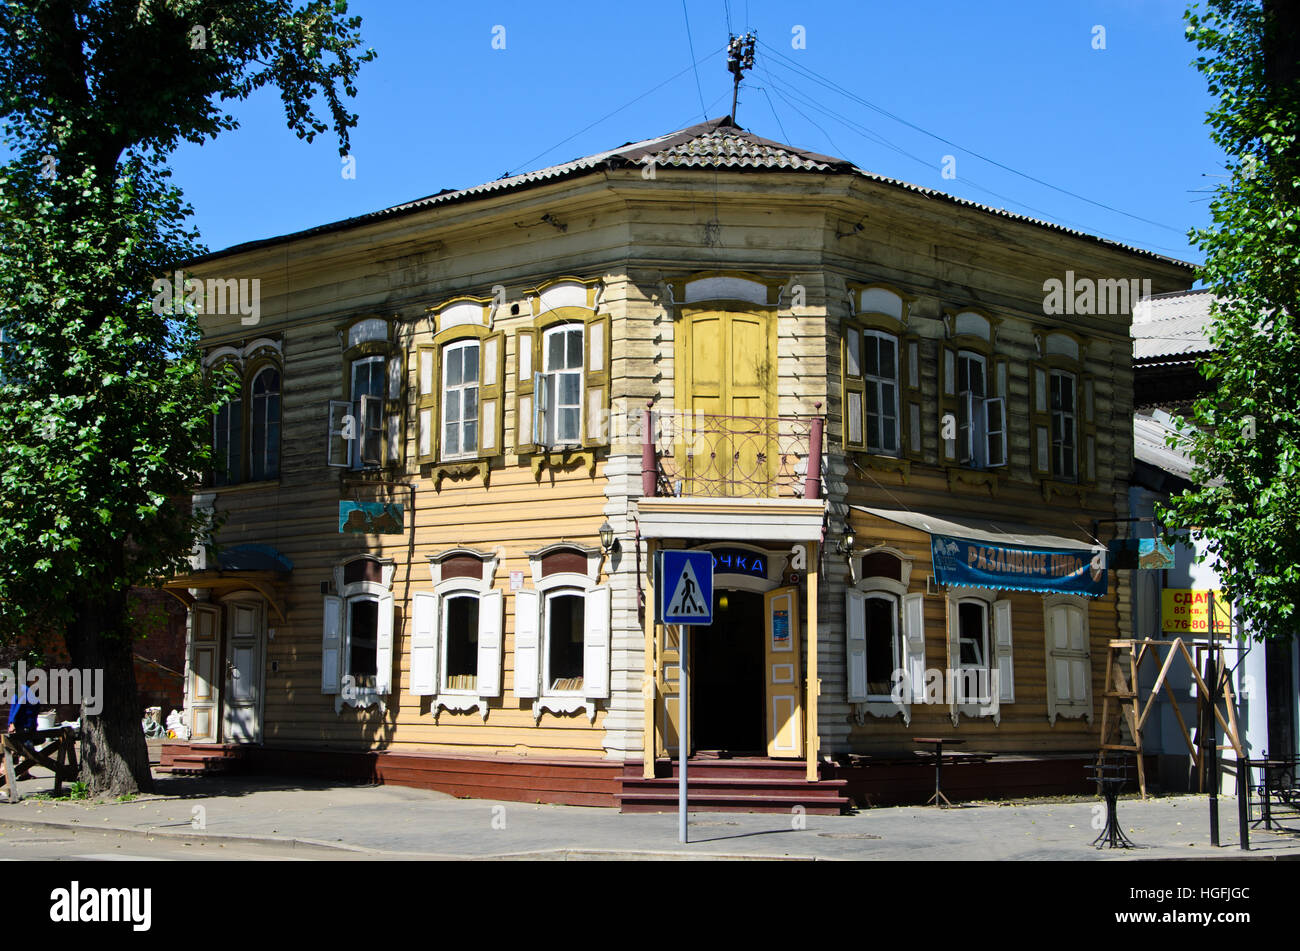 An century old house like this one can be seen in Irkutsk Stock Photo